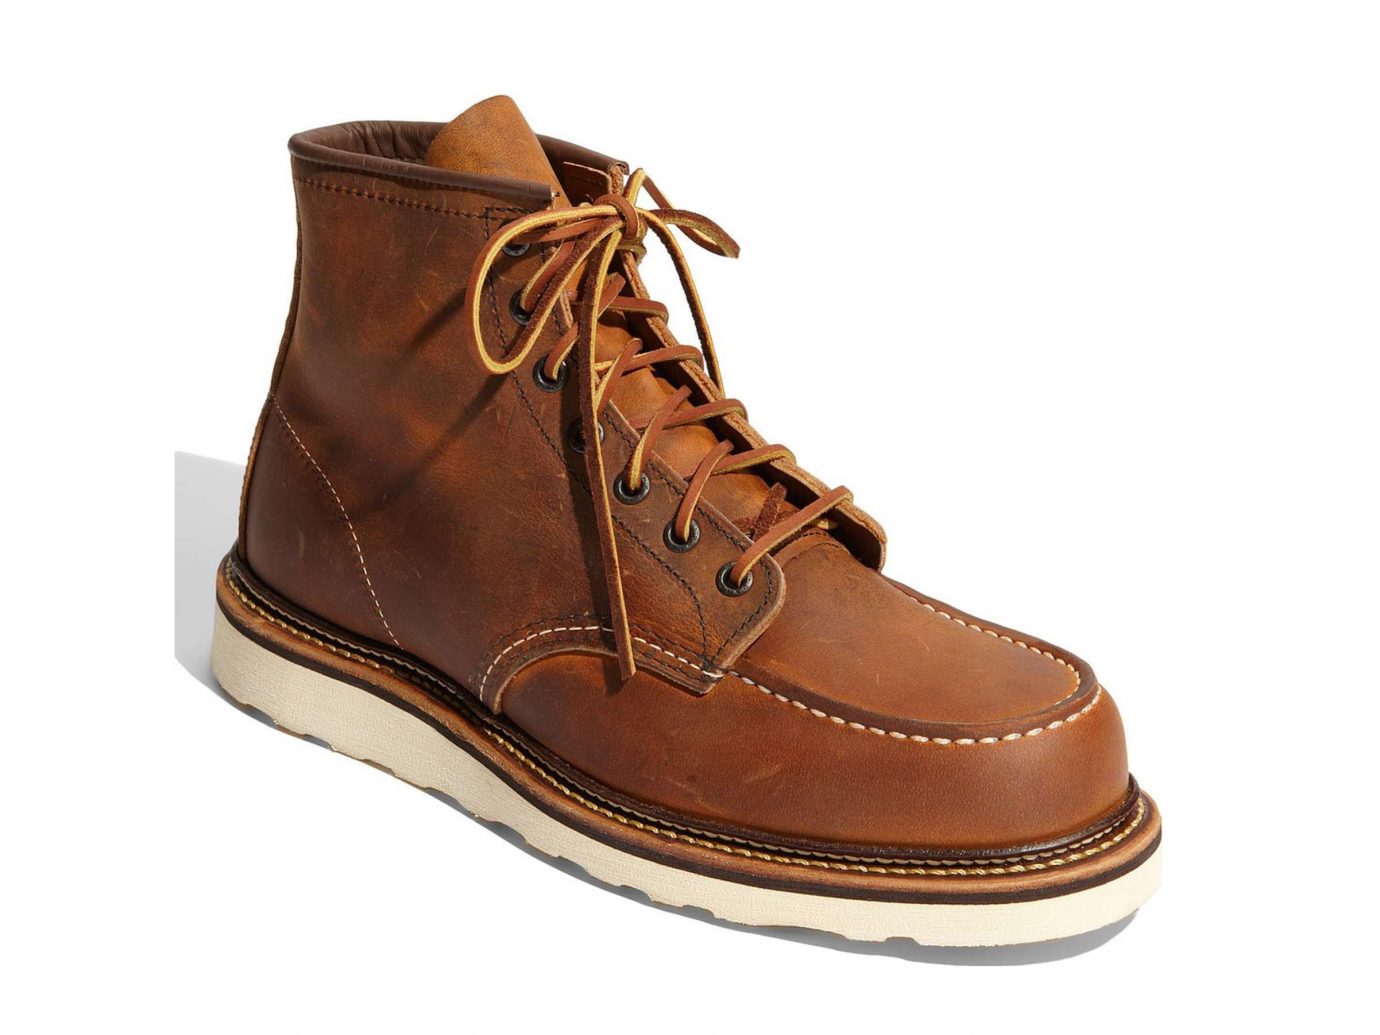 Style + Design Travel Shop footwear boot brown shoe work boots product walking shoe leather outdoor shoe